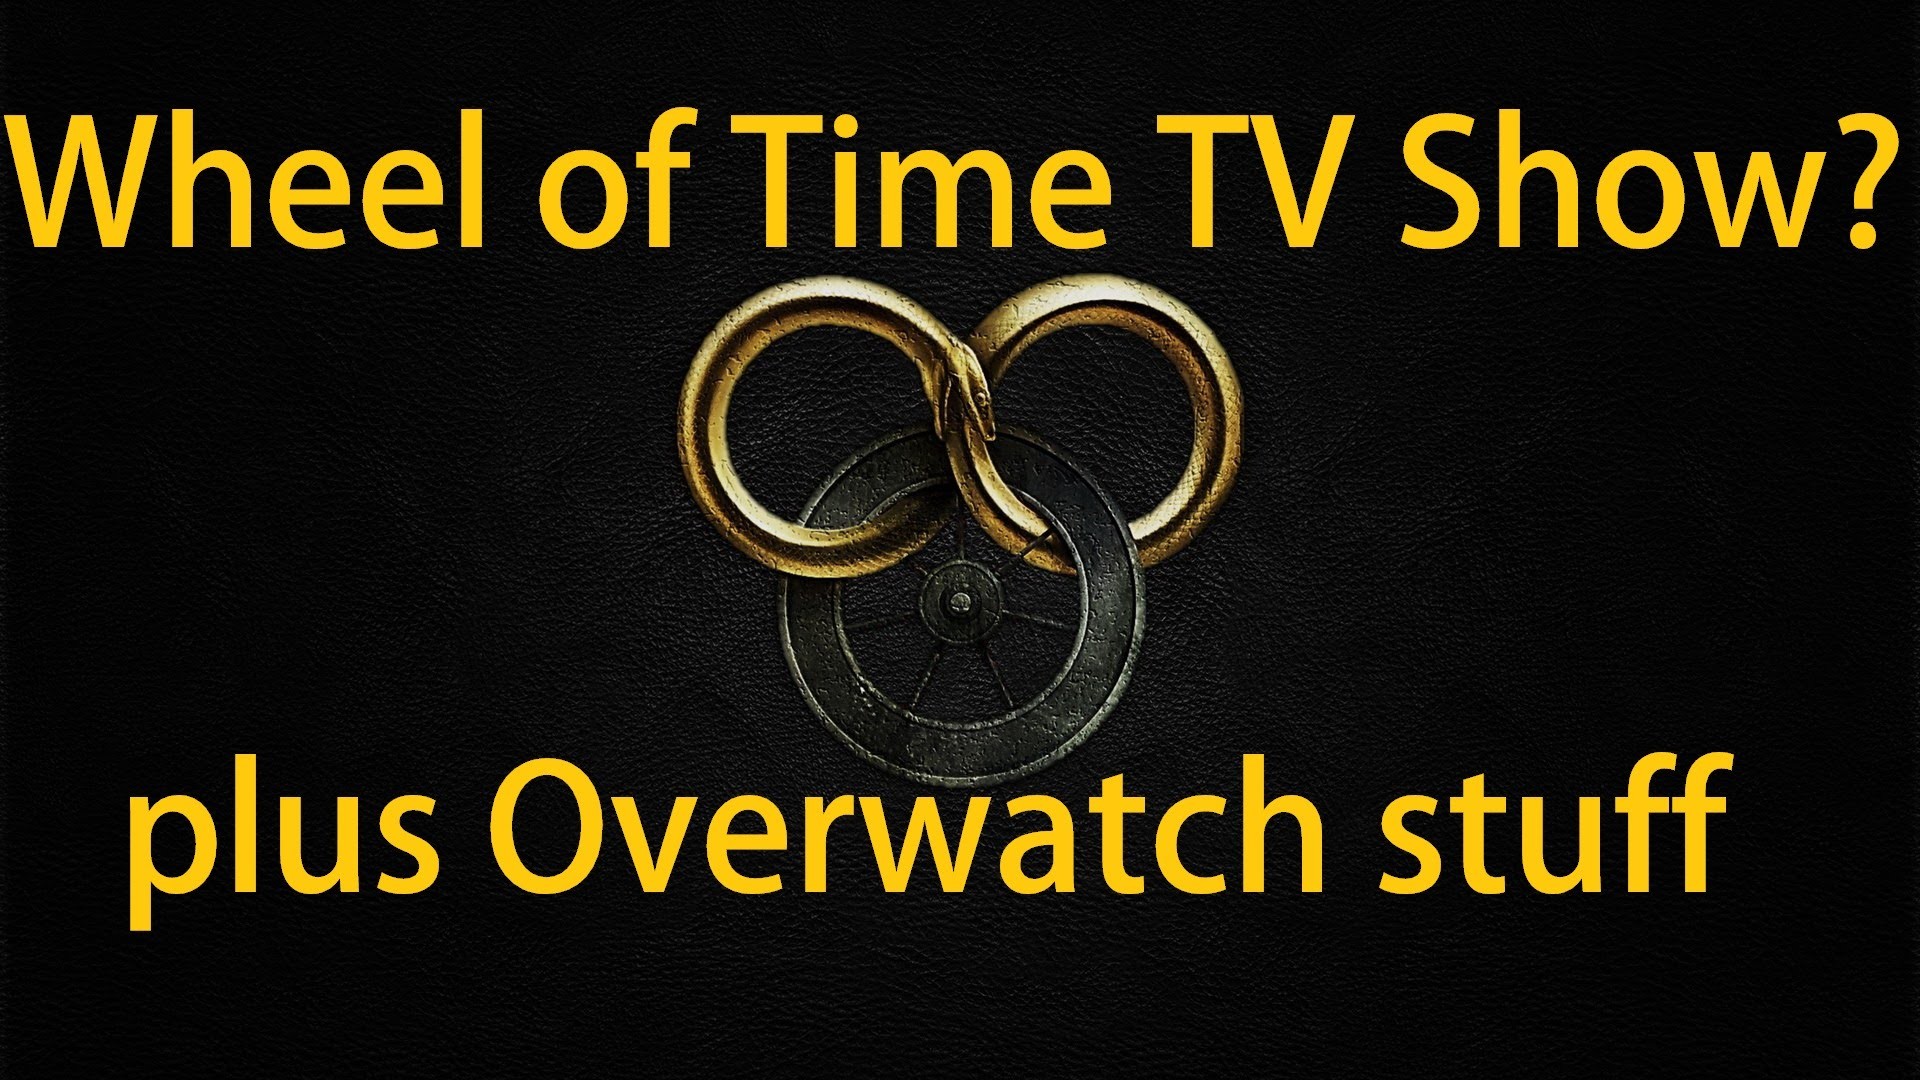 Overwatch Beta and Wheel of Time News